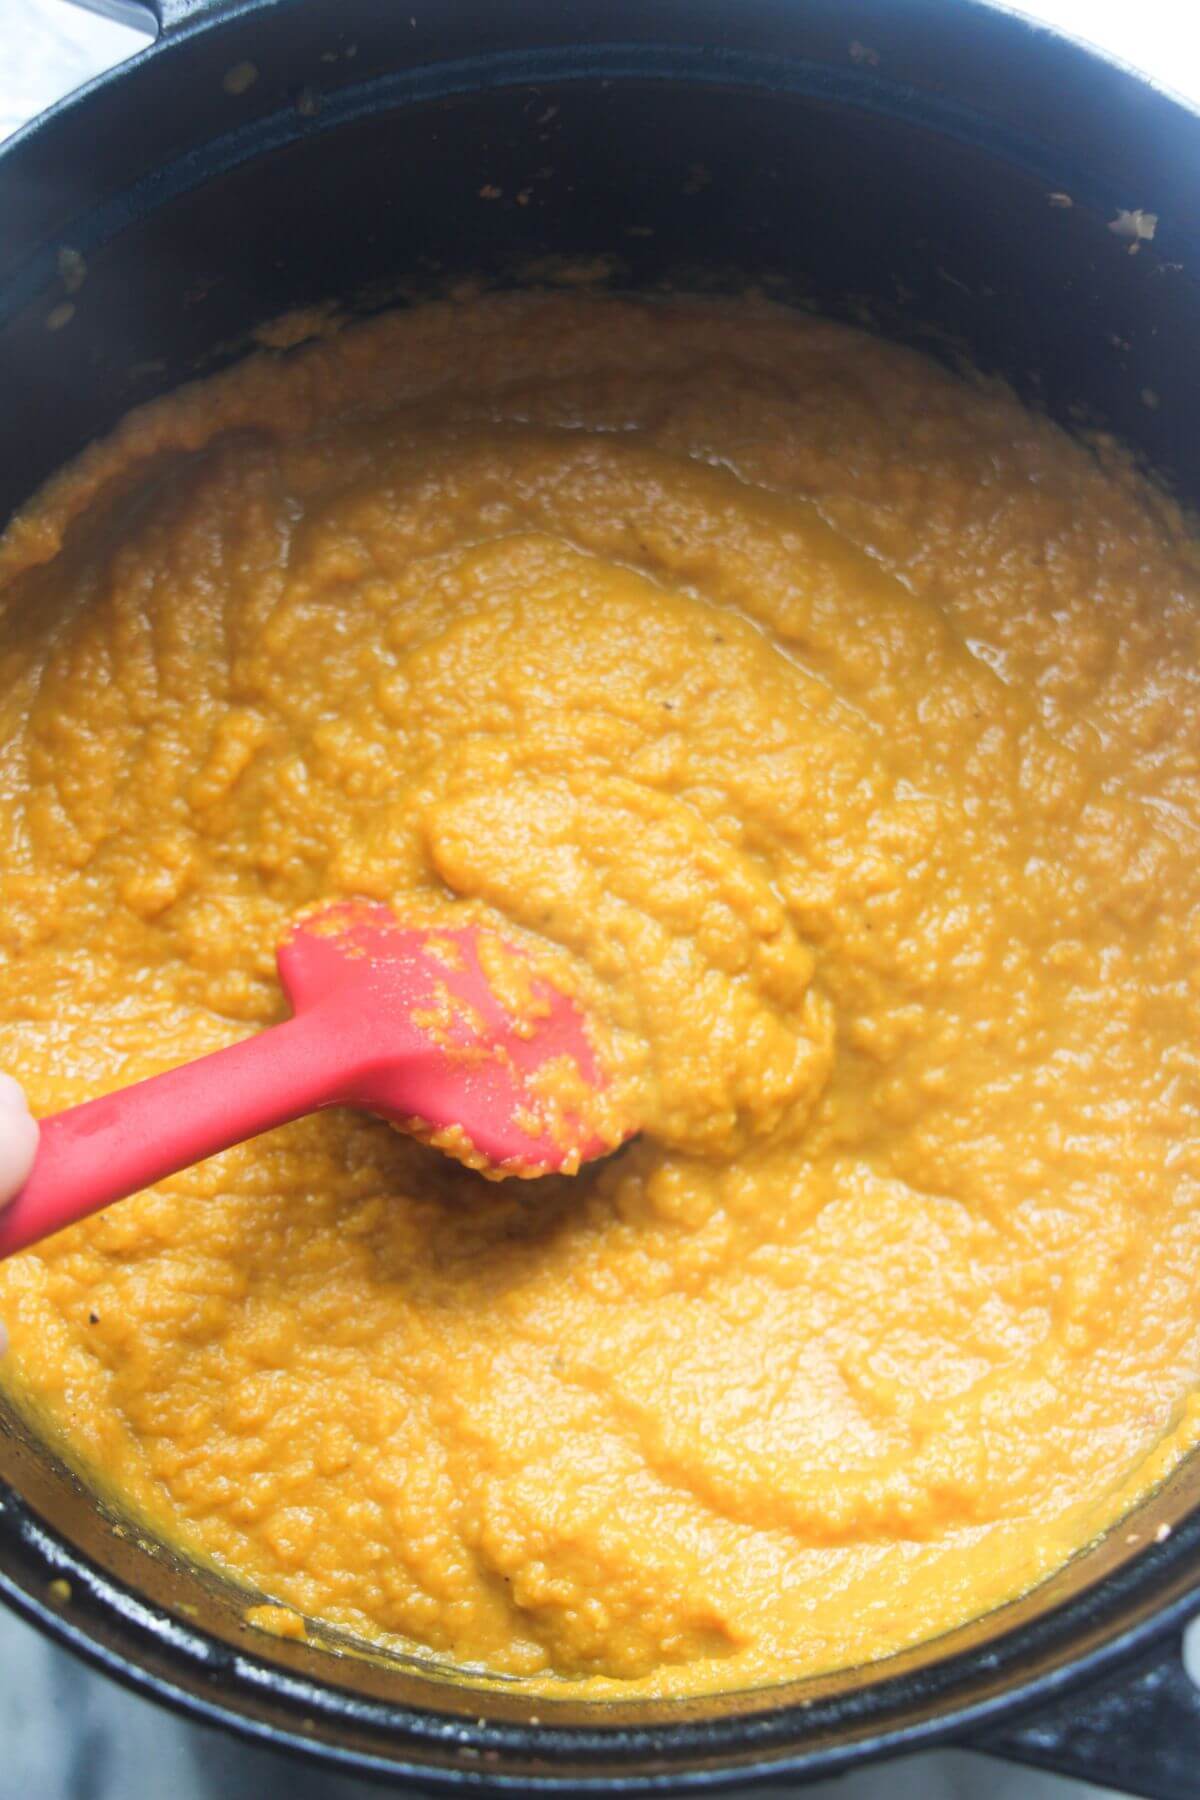 Blended carrot coriander soup in a large black pot with a red spatula stirring it.